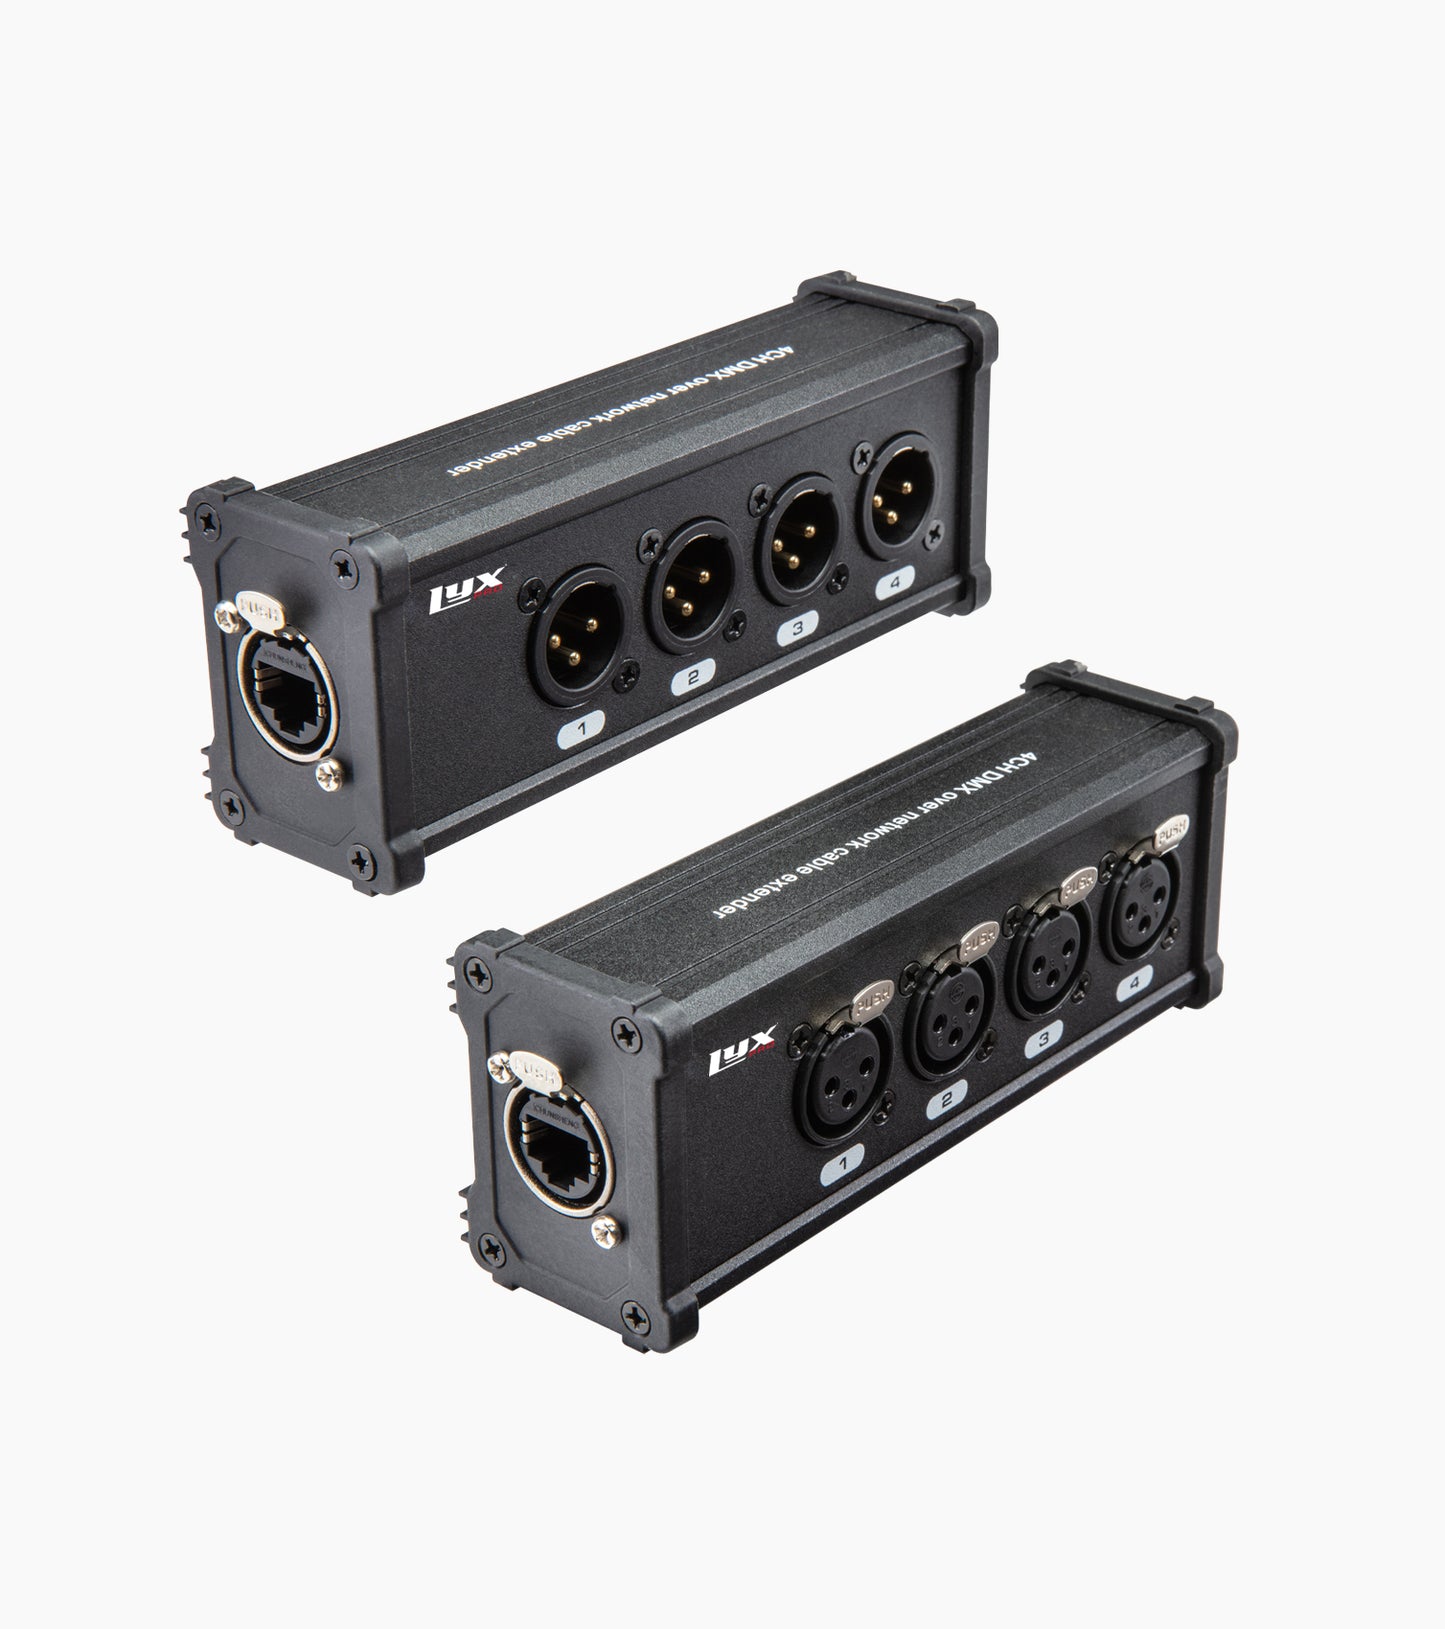 LyxPro 4-Channel XLR to Cat6 Network Cable Breakouts - Hero image